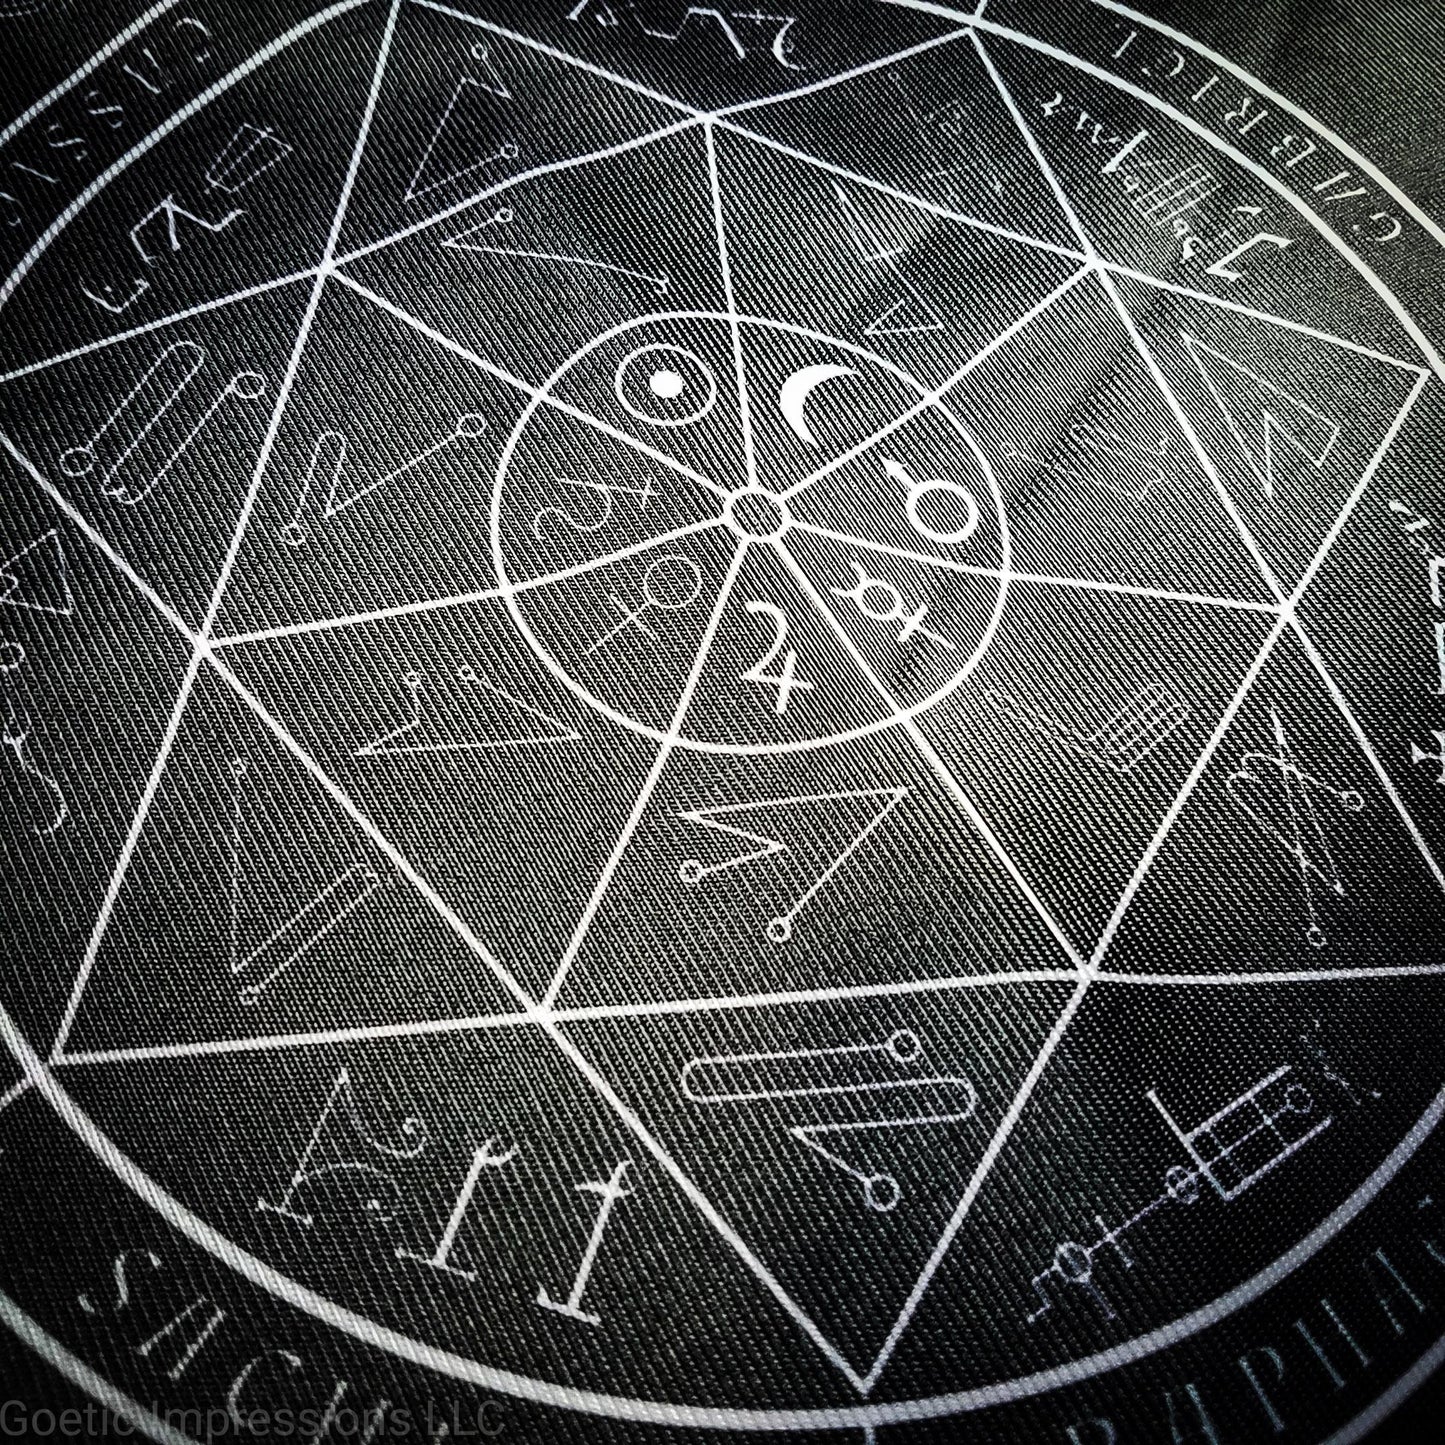 A black and white altar cloth with a seal of the planetary Archangels in the center. The seal contains various astrological sigils.